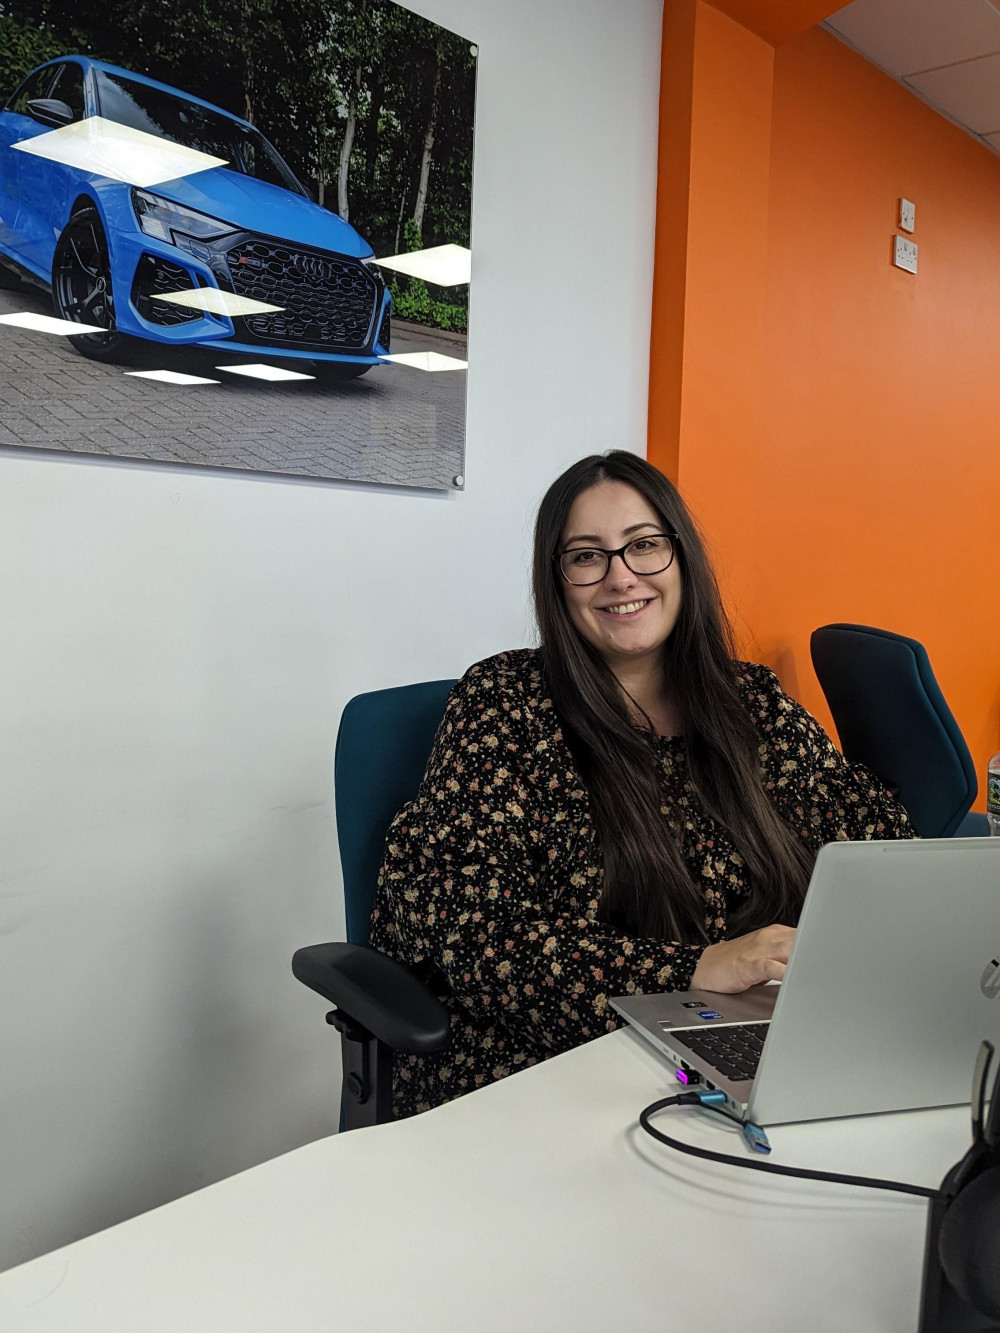 Swansway Motor Group recently appointed Abigail Daniels as its new contact centre manager, based inside its central head office in Crewe (Nub News).